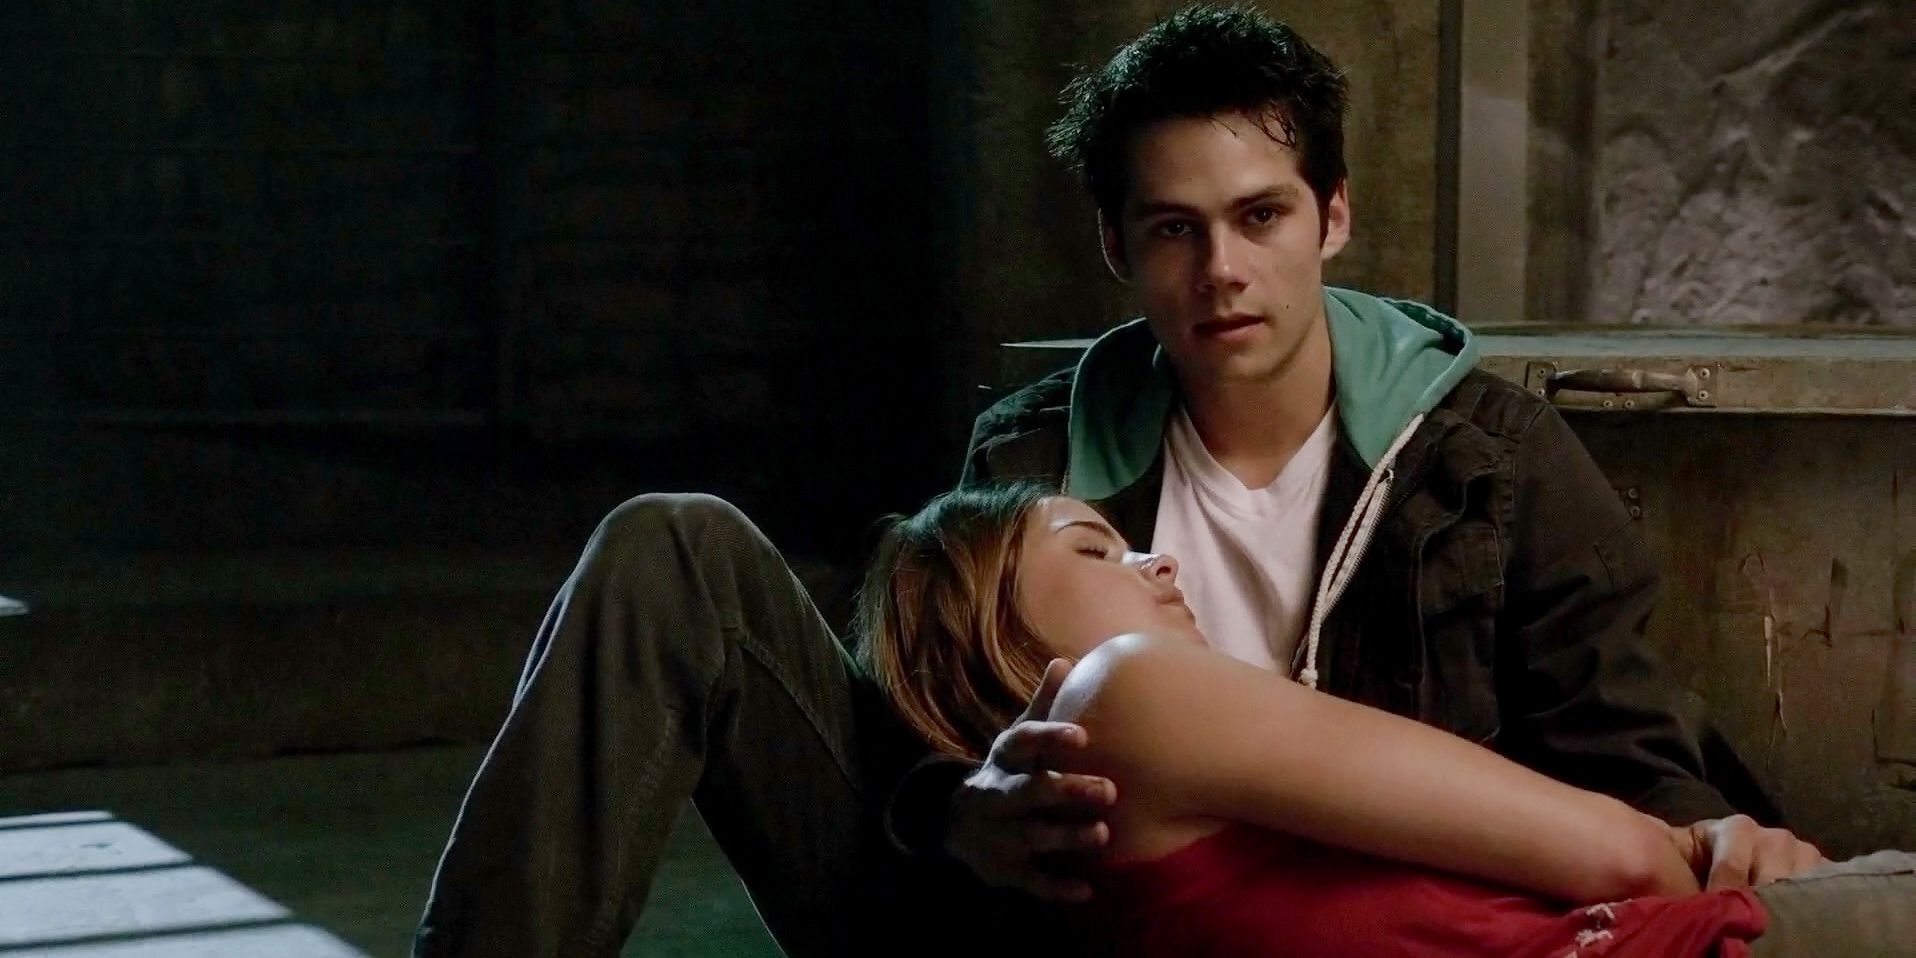 Stiles holding Malia when shes infected with a virus in Weaponized of Teen Wolf